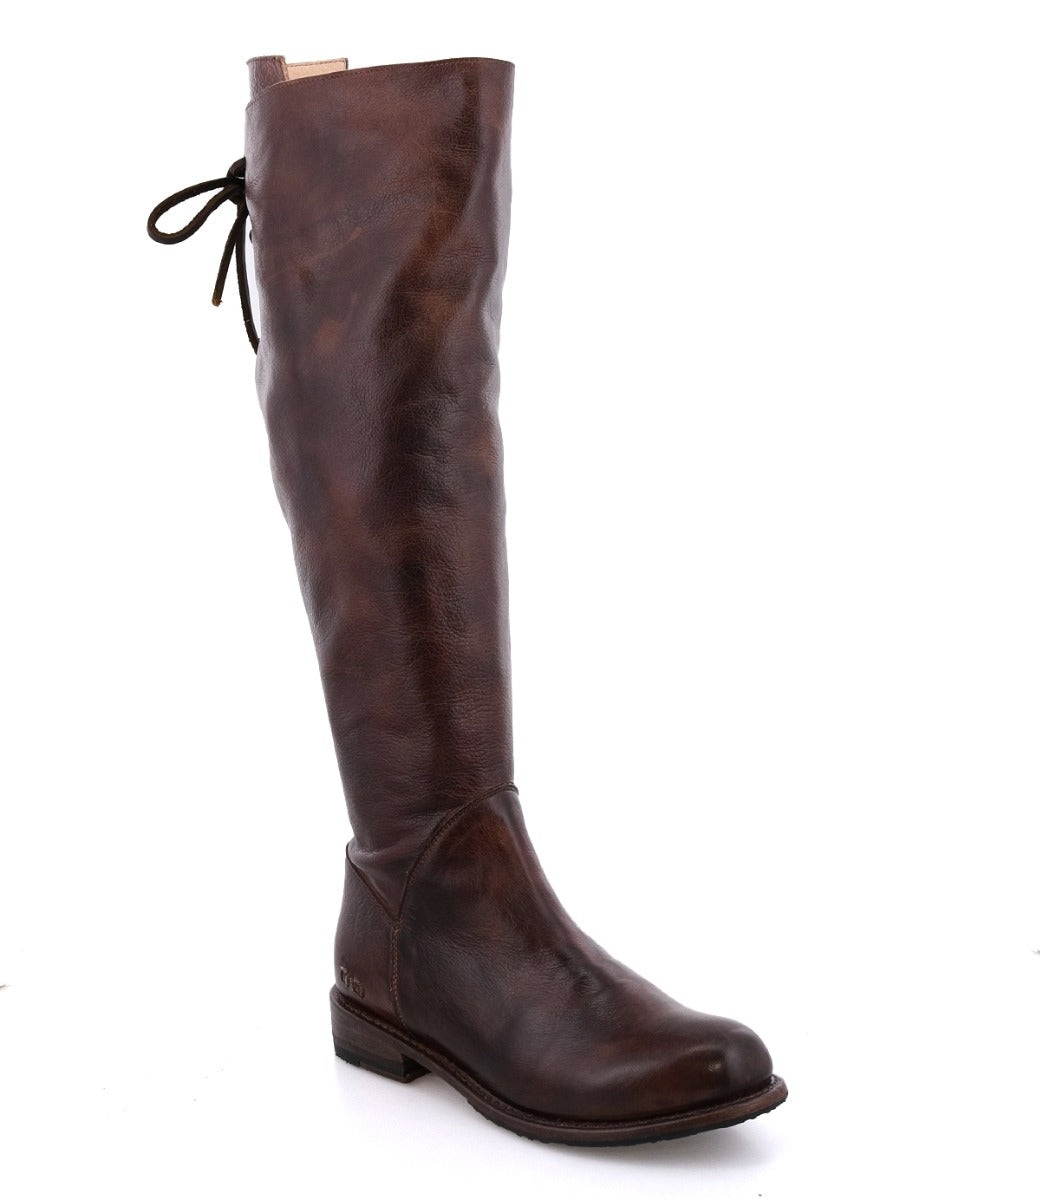 A women's Manchester brown leather boot with laces by Bed Stu.